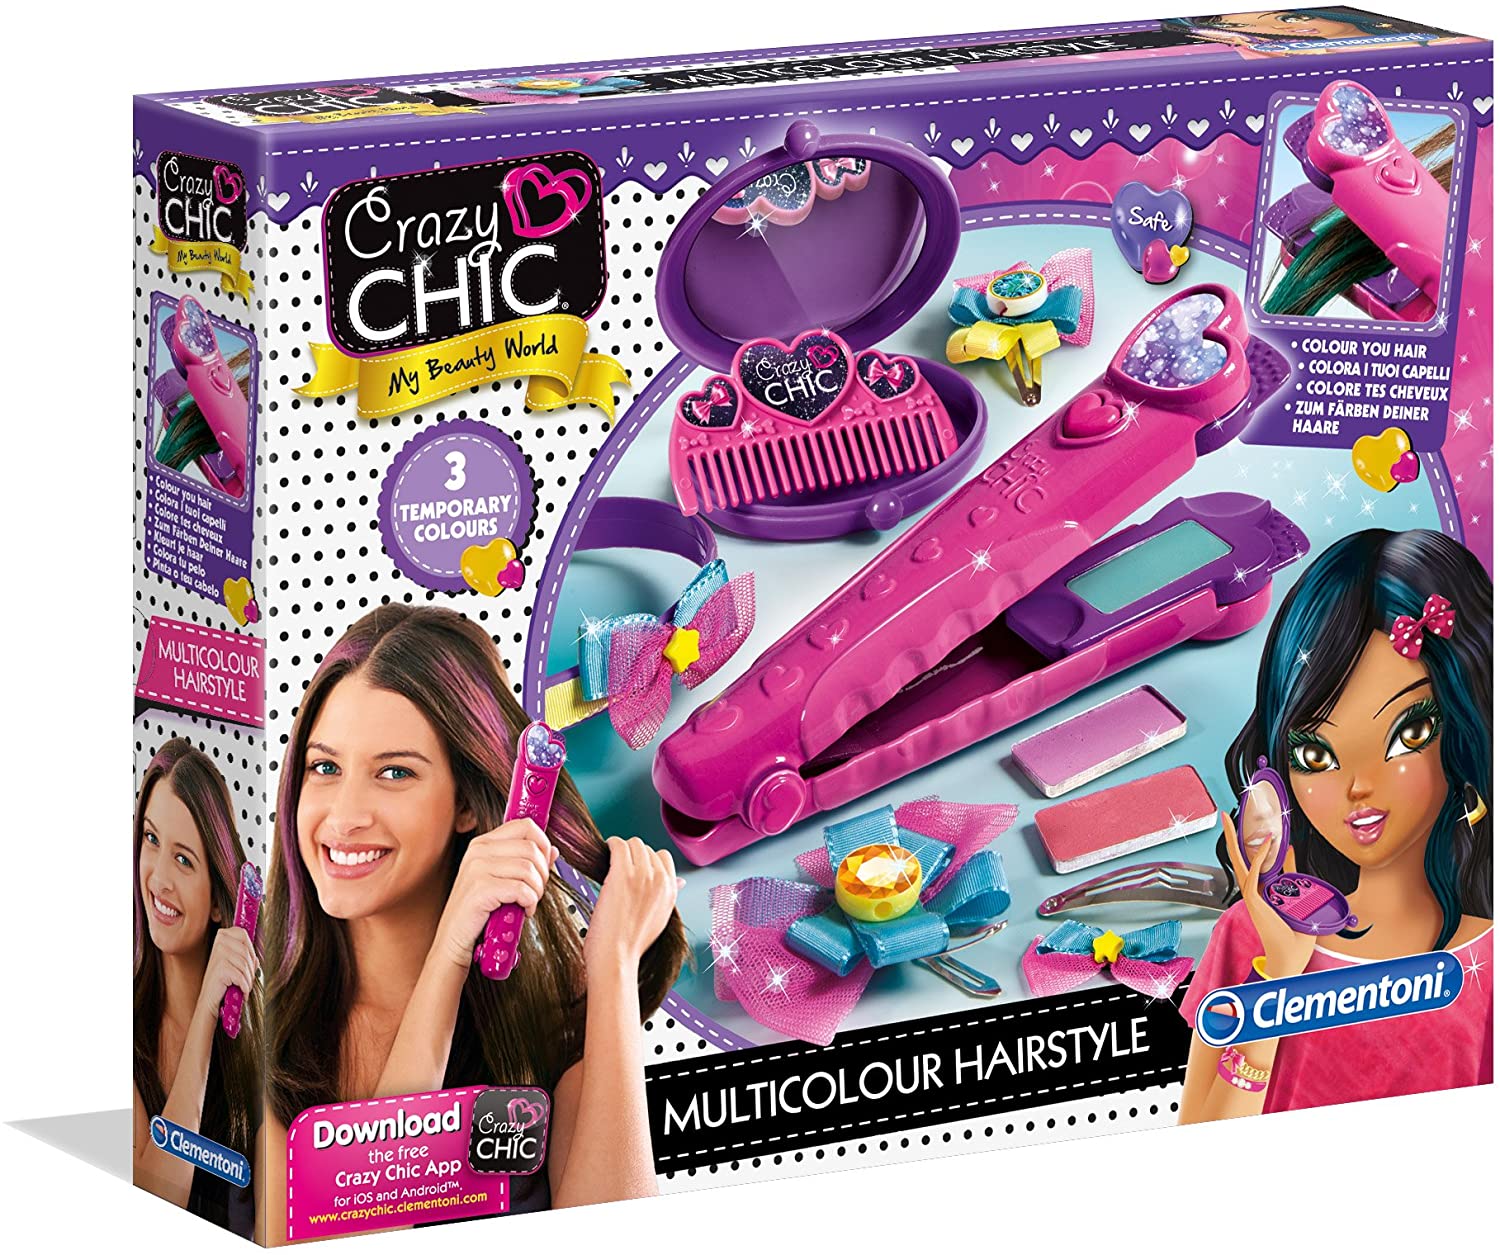 Crazy Chic Piastra Multicolor Hairstyle 15225